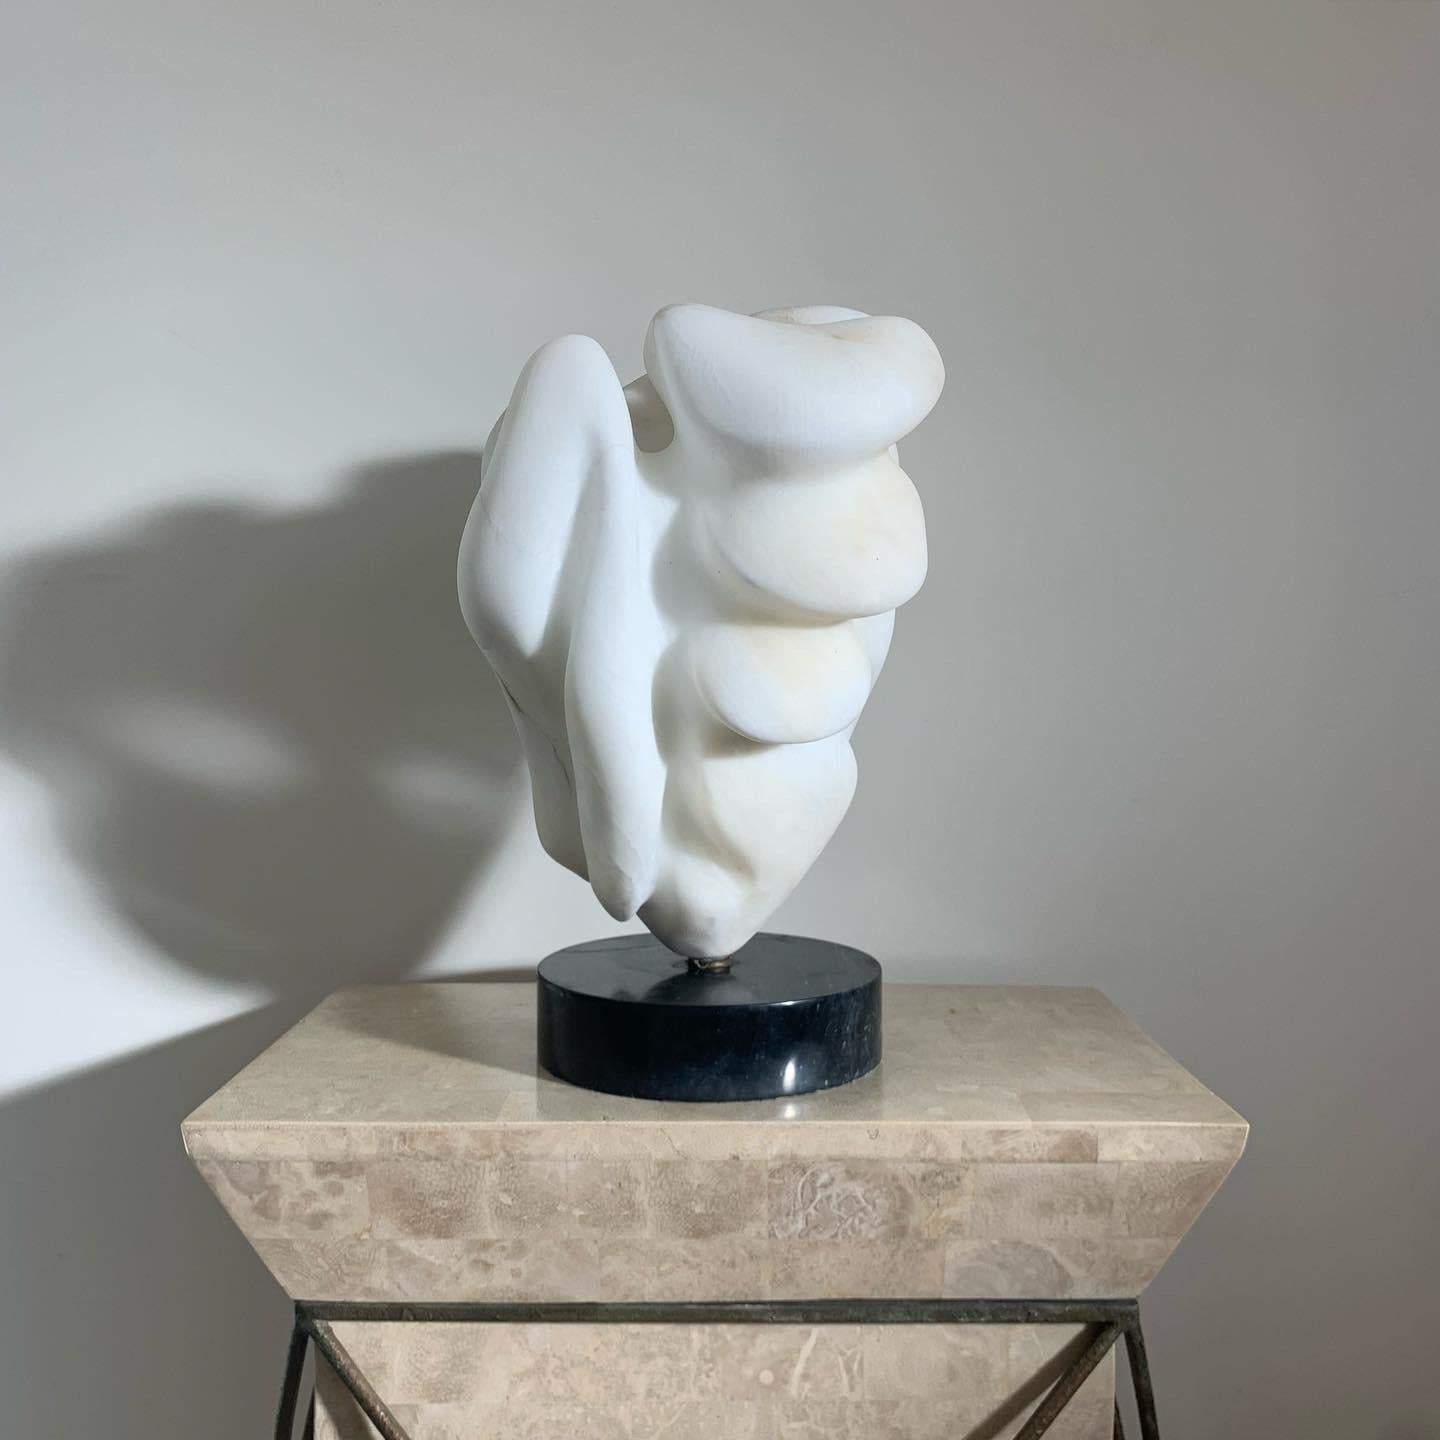 A fine art marble sculpture, 1960s. Hand-carved. Mounted upon a black marble plinth. Minor weathering but overall fabulous condition. Very heavy - 55 lbs. Pick up in LA or delivery options available. 
Measures: 9.5” W X 17.25” H.